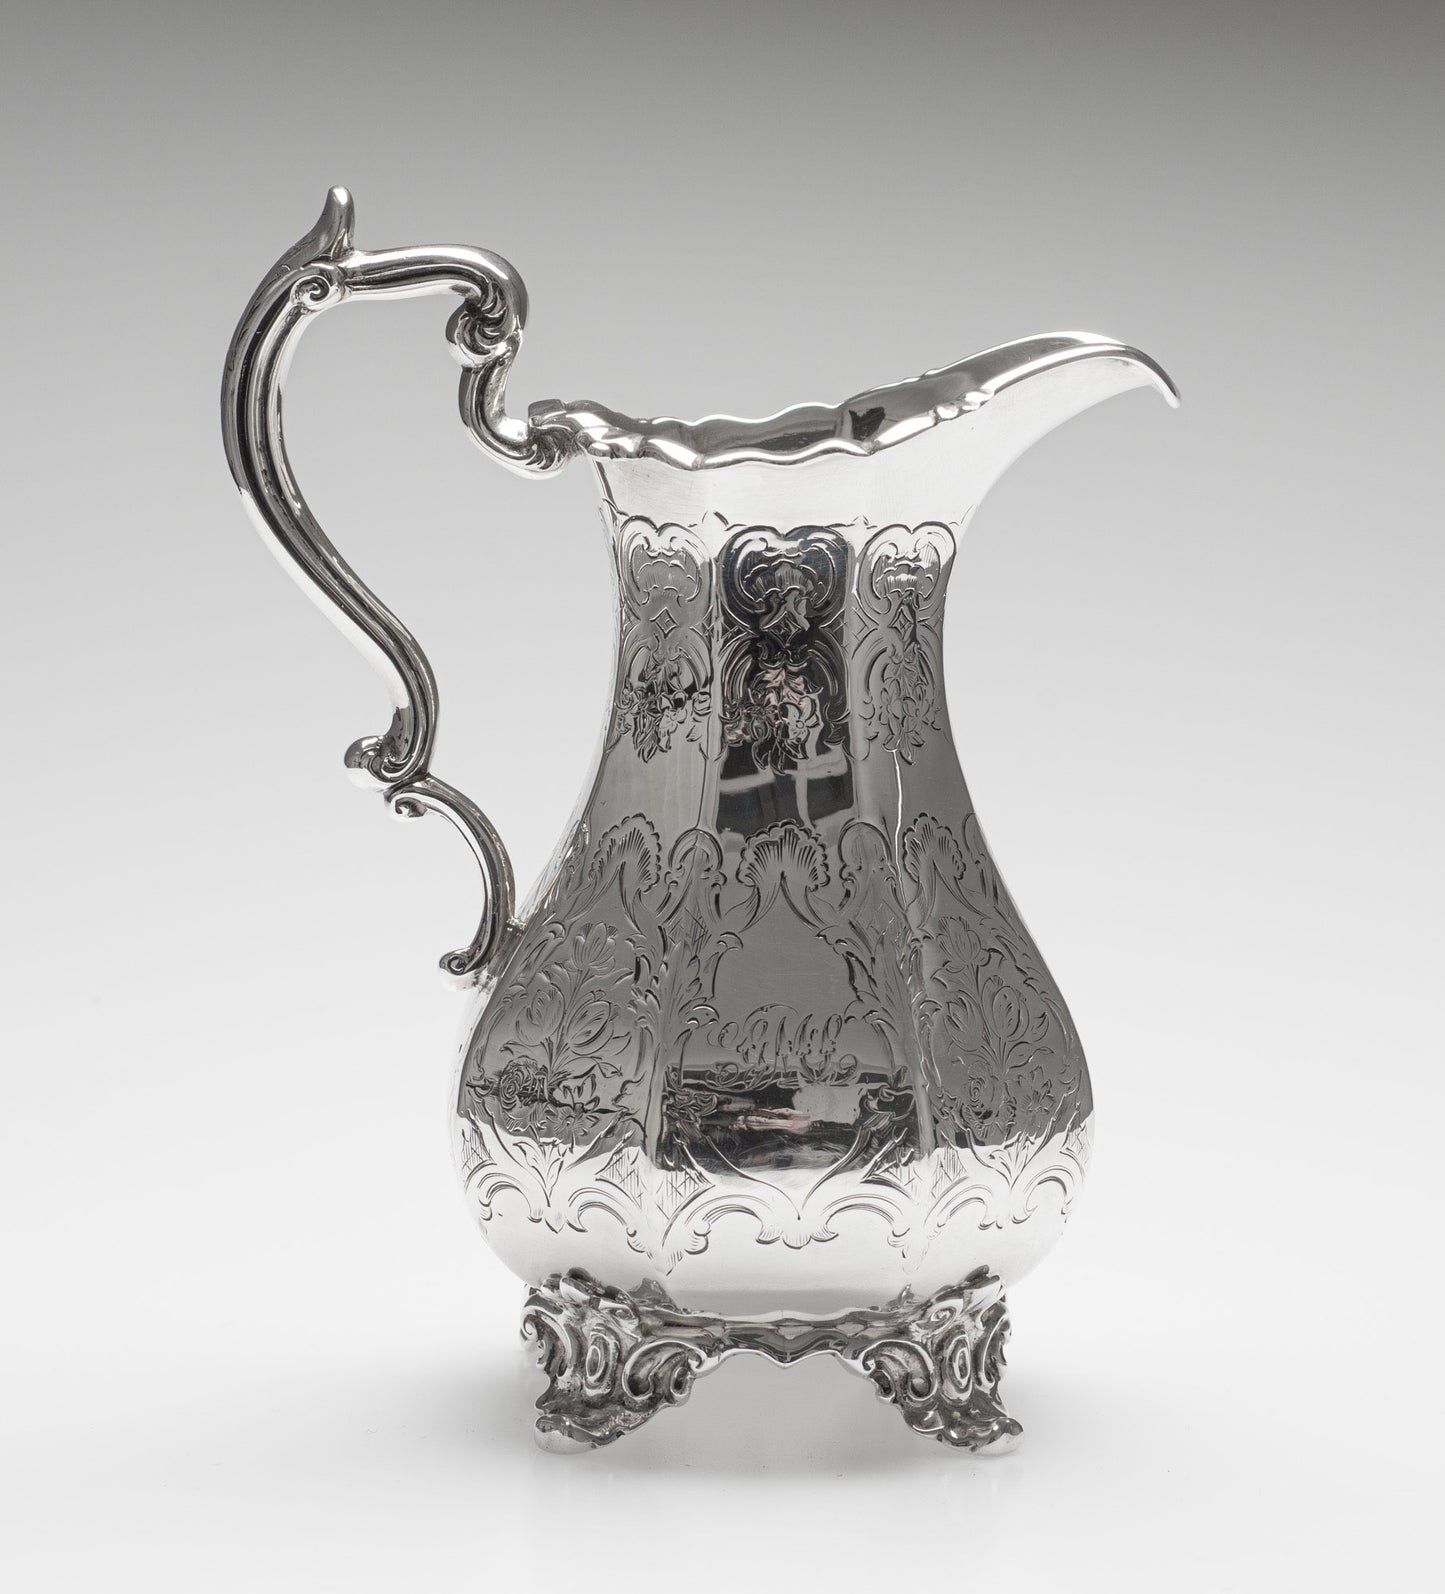 Antique Early Victorian Solid Silver Milk Jug with Chased Design, London 1851 (Code 2386)